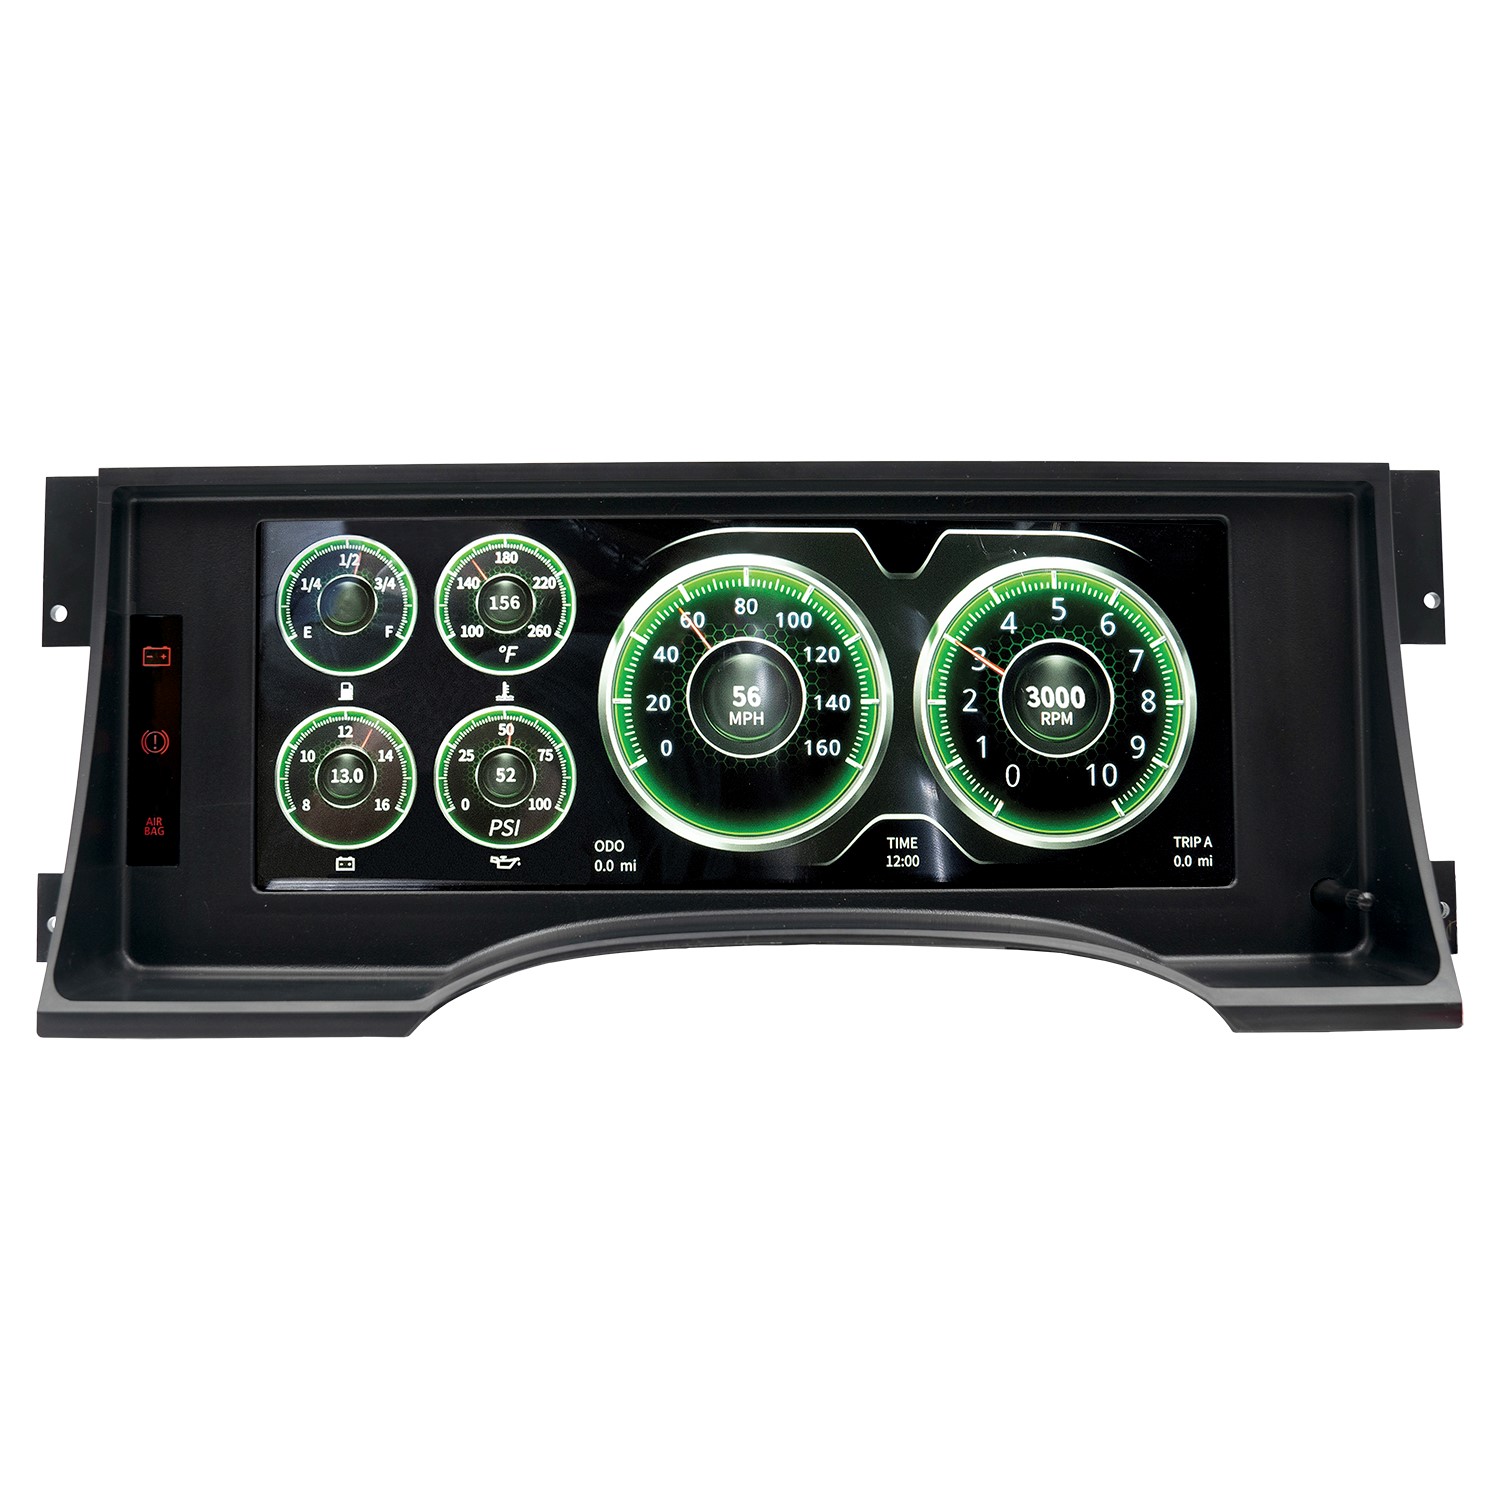 AutoMeter Invision '95-'98 Chevy Truck Digital LCD Dash Kit